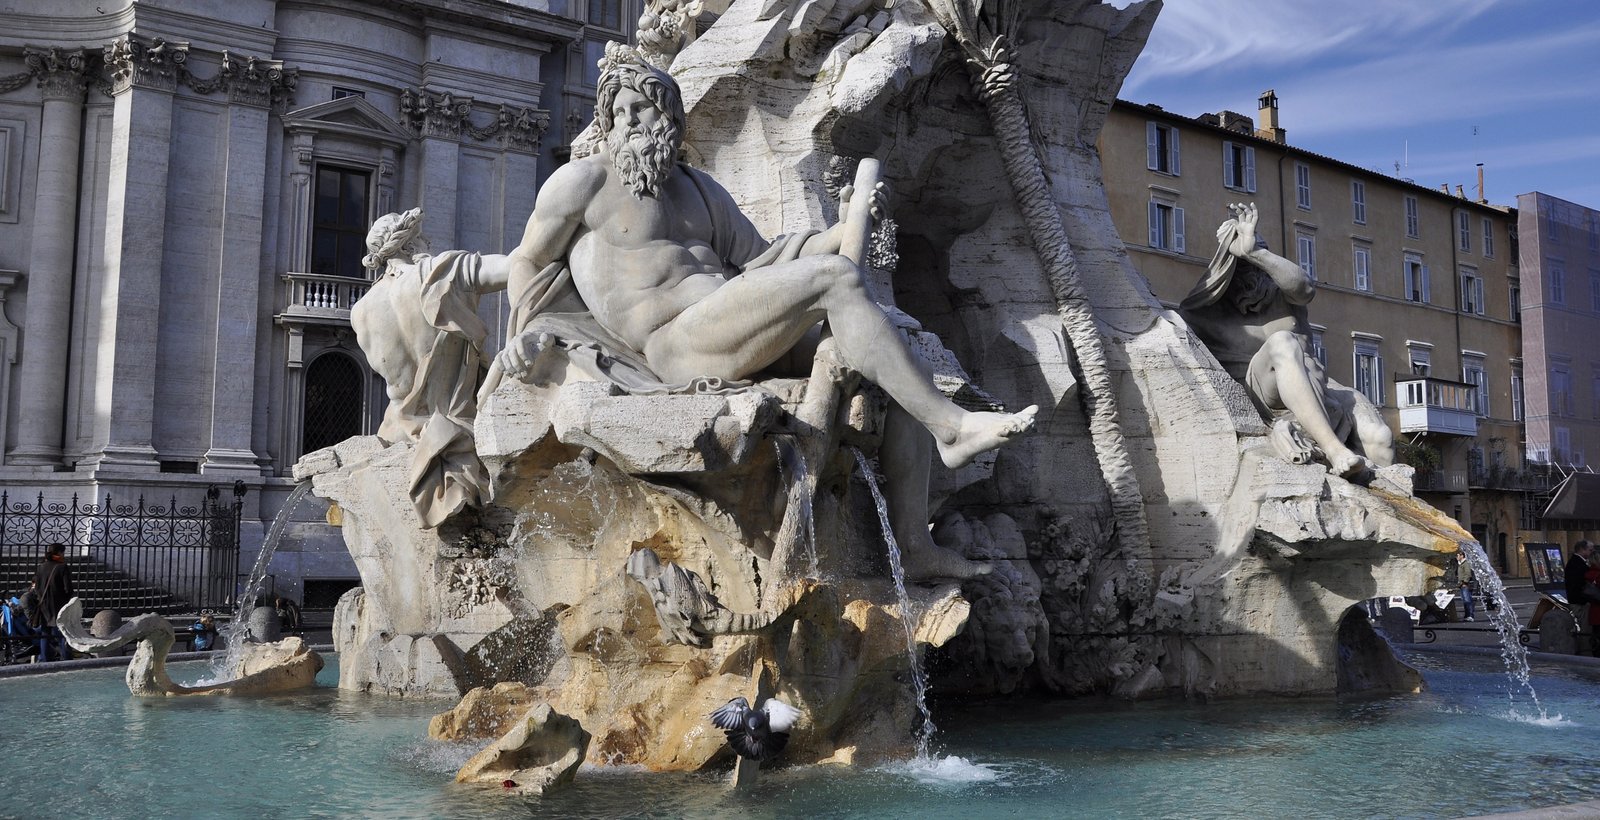 Bernini: The Artist Who Breathed Life into Marble